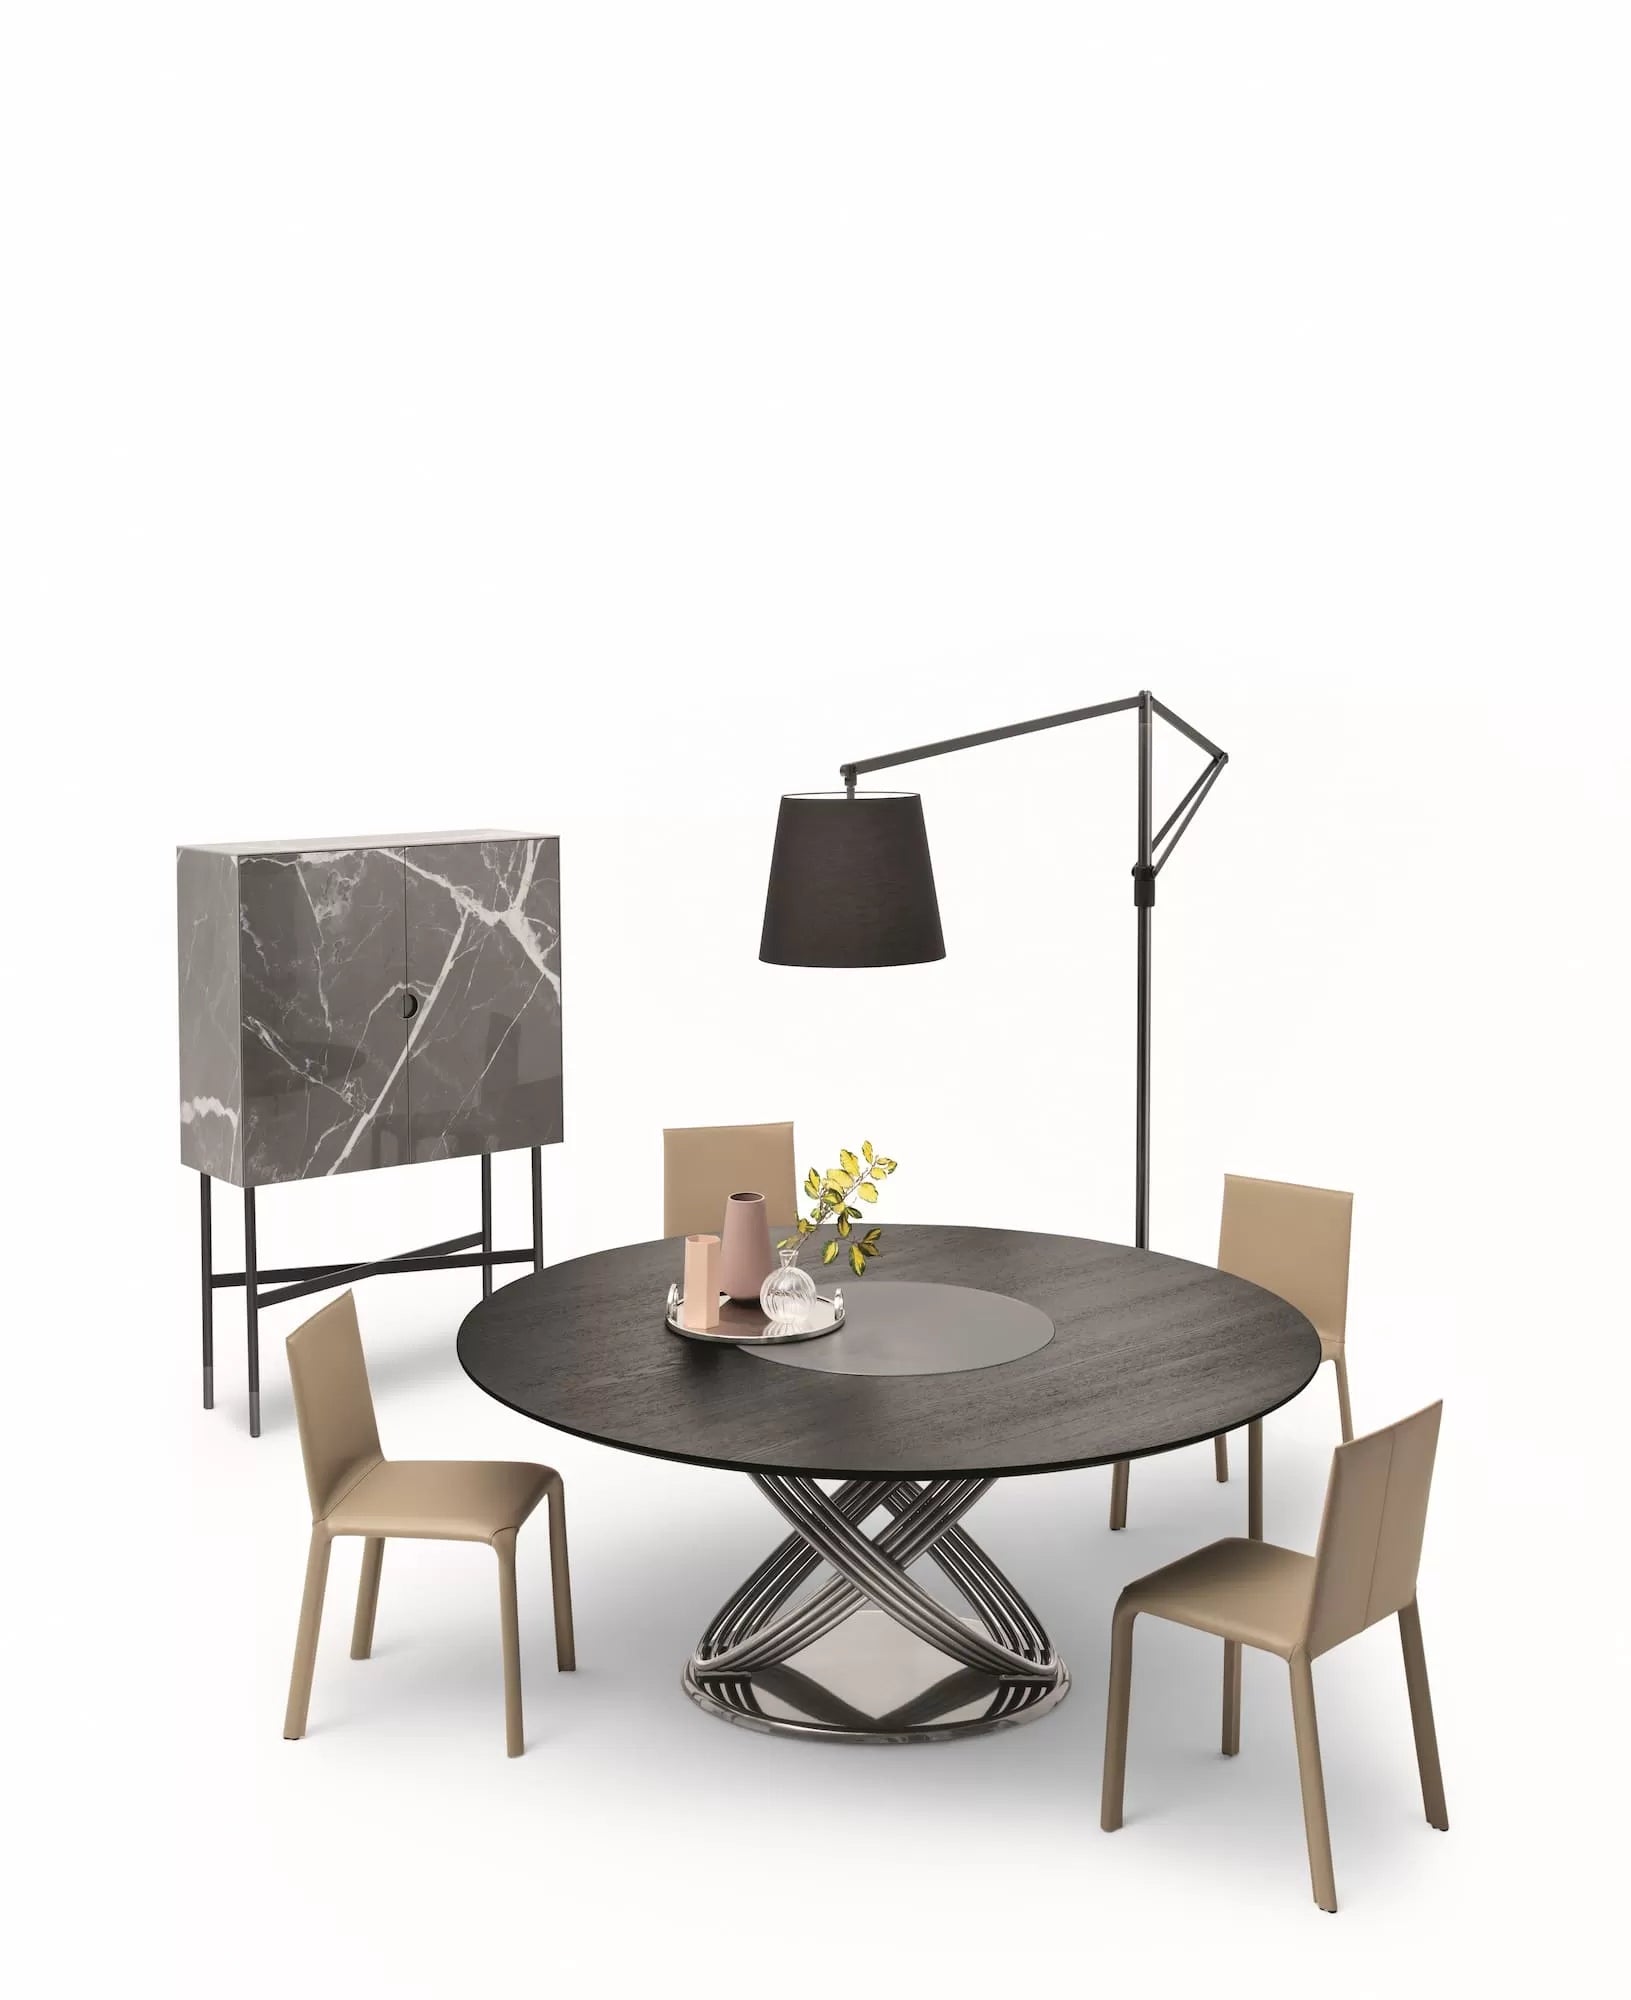 Cloe Floor Lamp With Frame And Base In Lacquered Metal And Adjustable Arm In Lacquered Aluminium